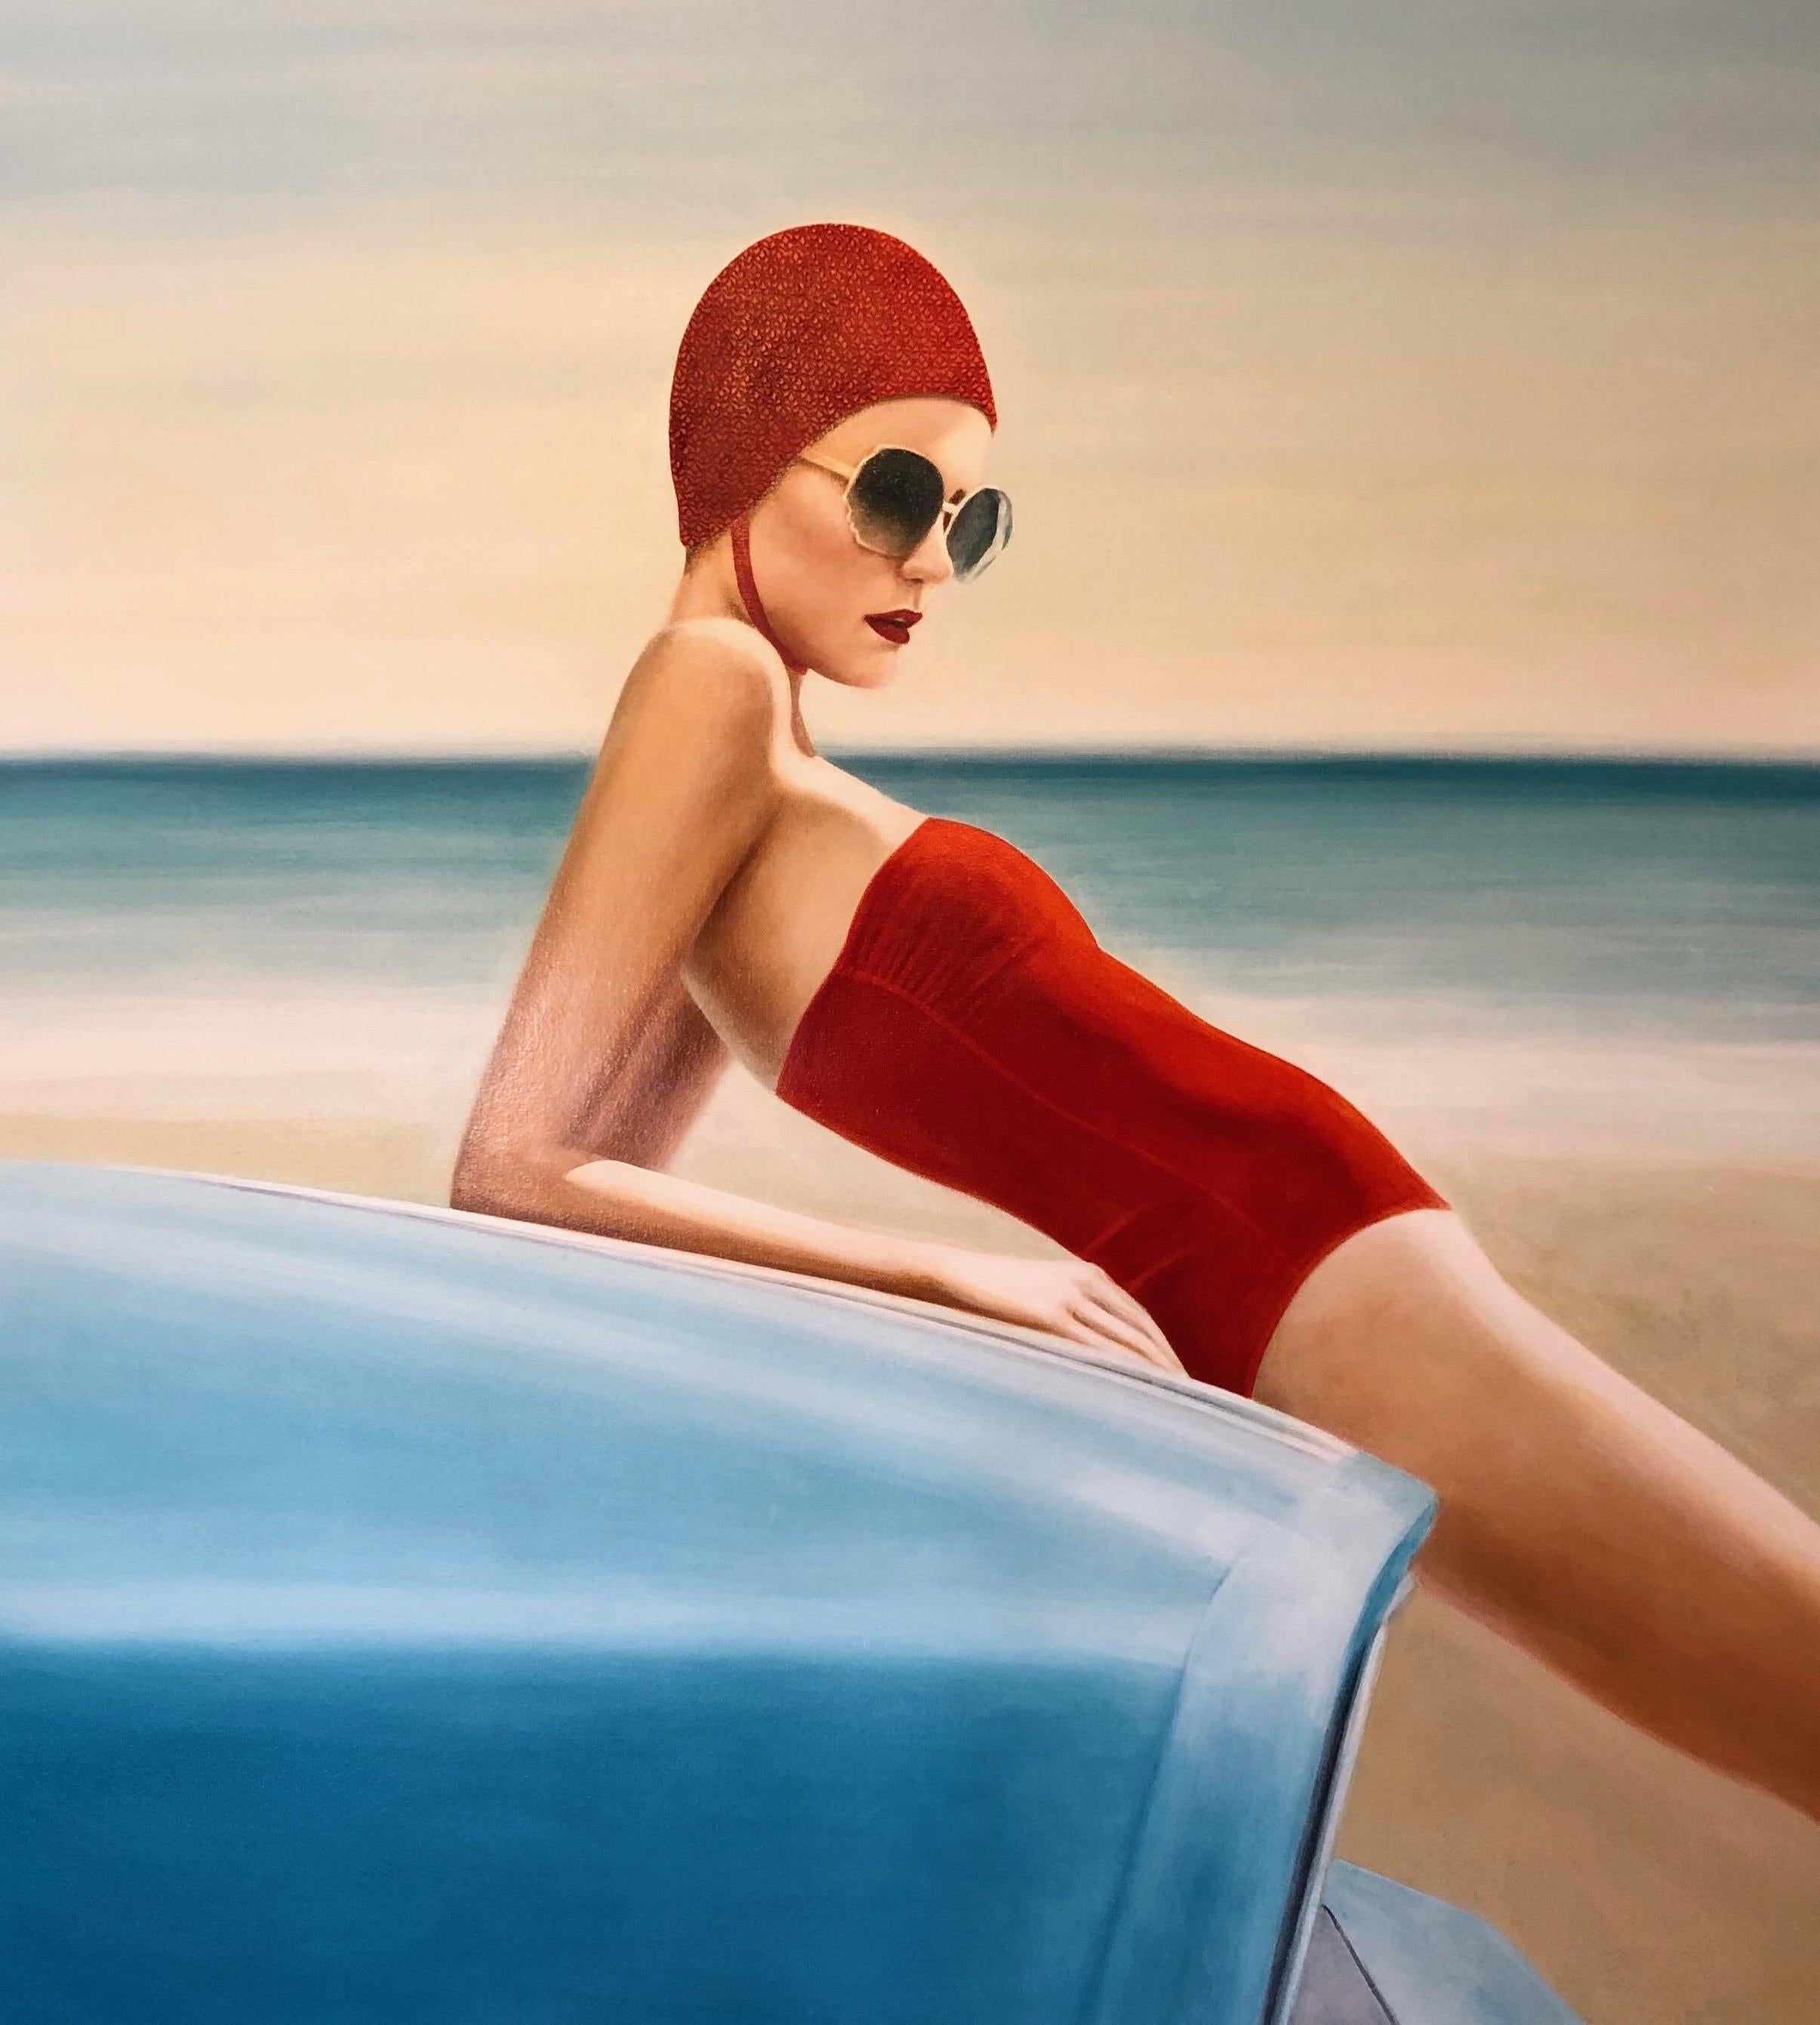 Elise Remender Figurative Painting - "Distant Summer" Woman in a red cap and bathing suit leaned on vintage blue car